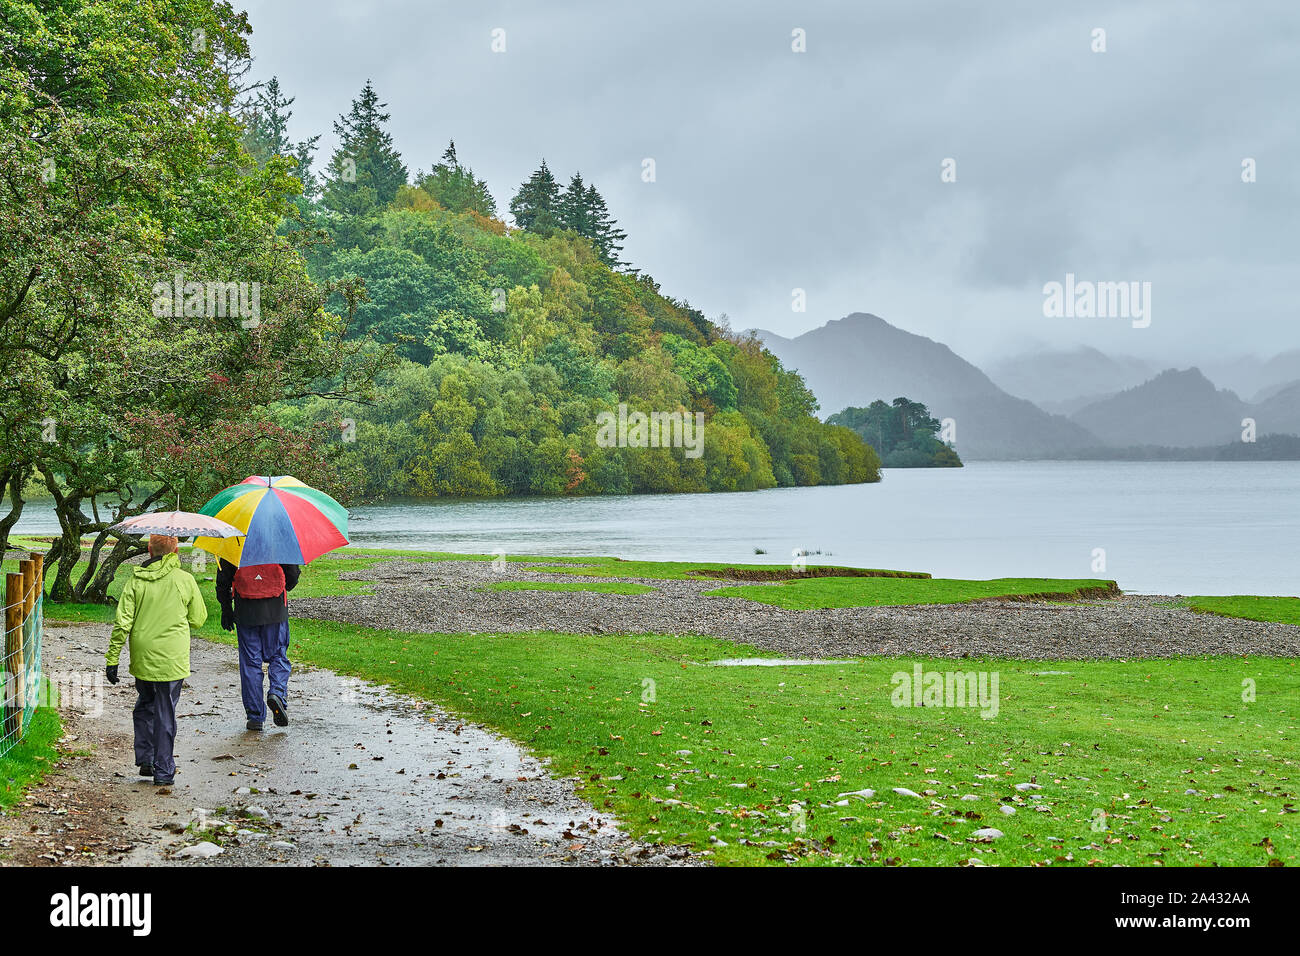 A man and a woman with their umbrellas up walk on a path by the shore on a cloudy, rainy day at Lake Derwentwater, Lake District national park, Cumbri Stock Photo